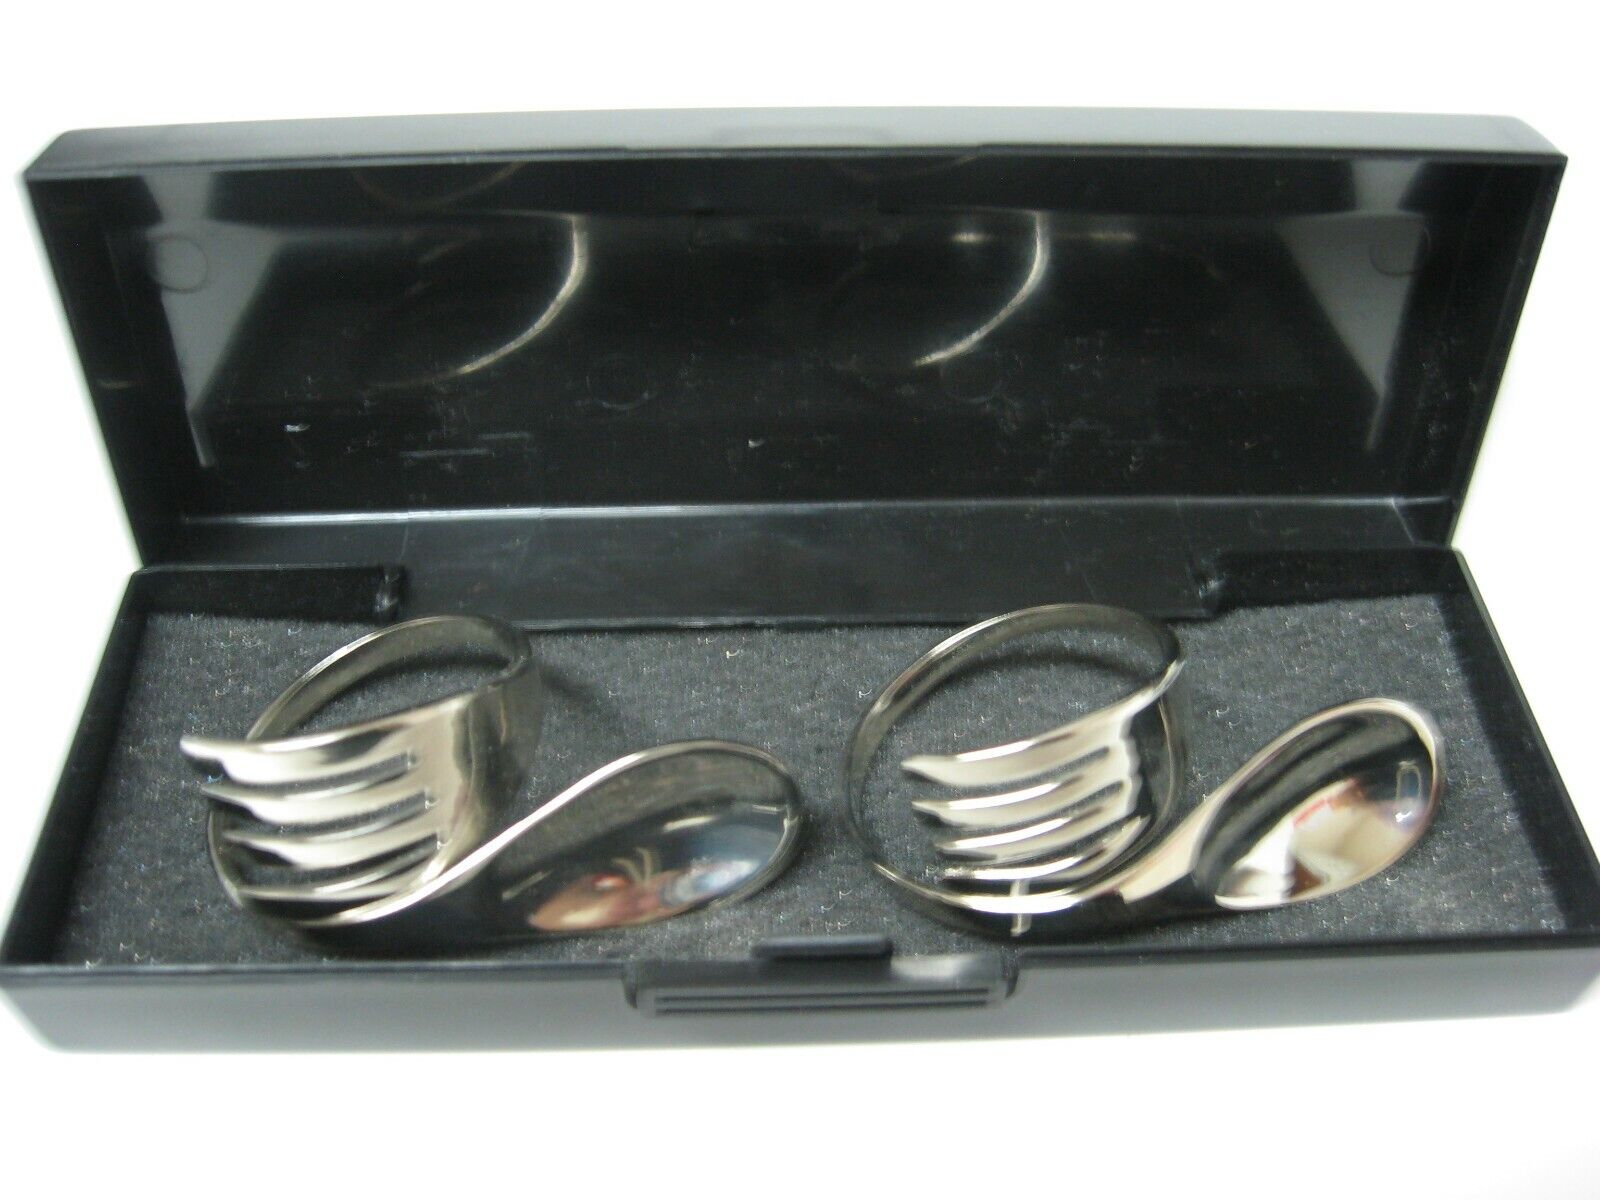 Lot 2 silver plated spoon/ fork NAPKIN RINGS 